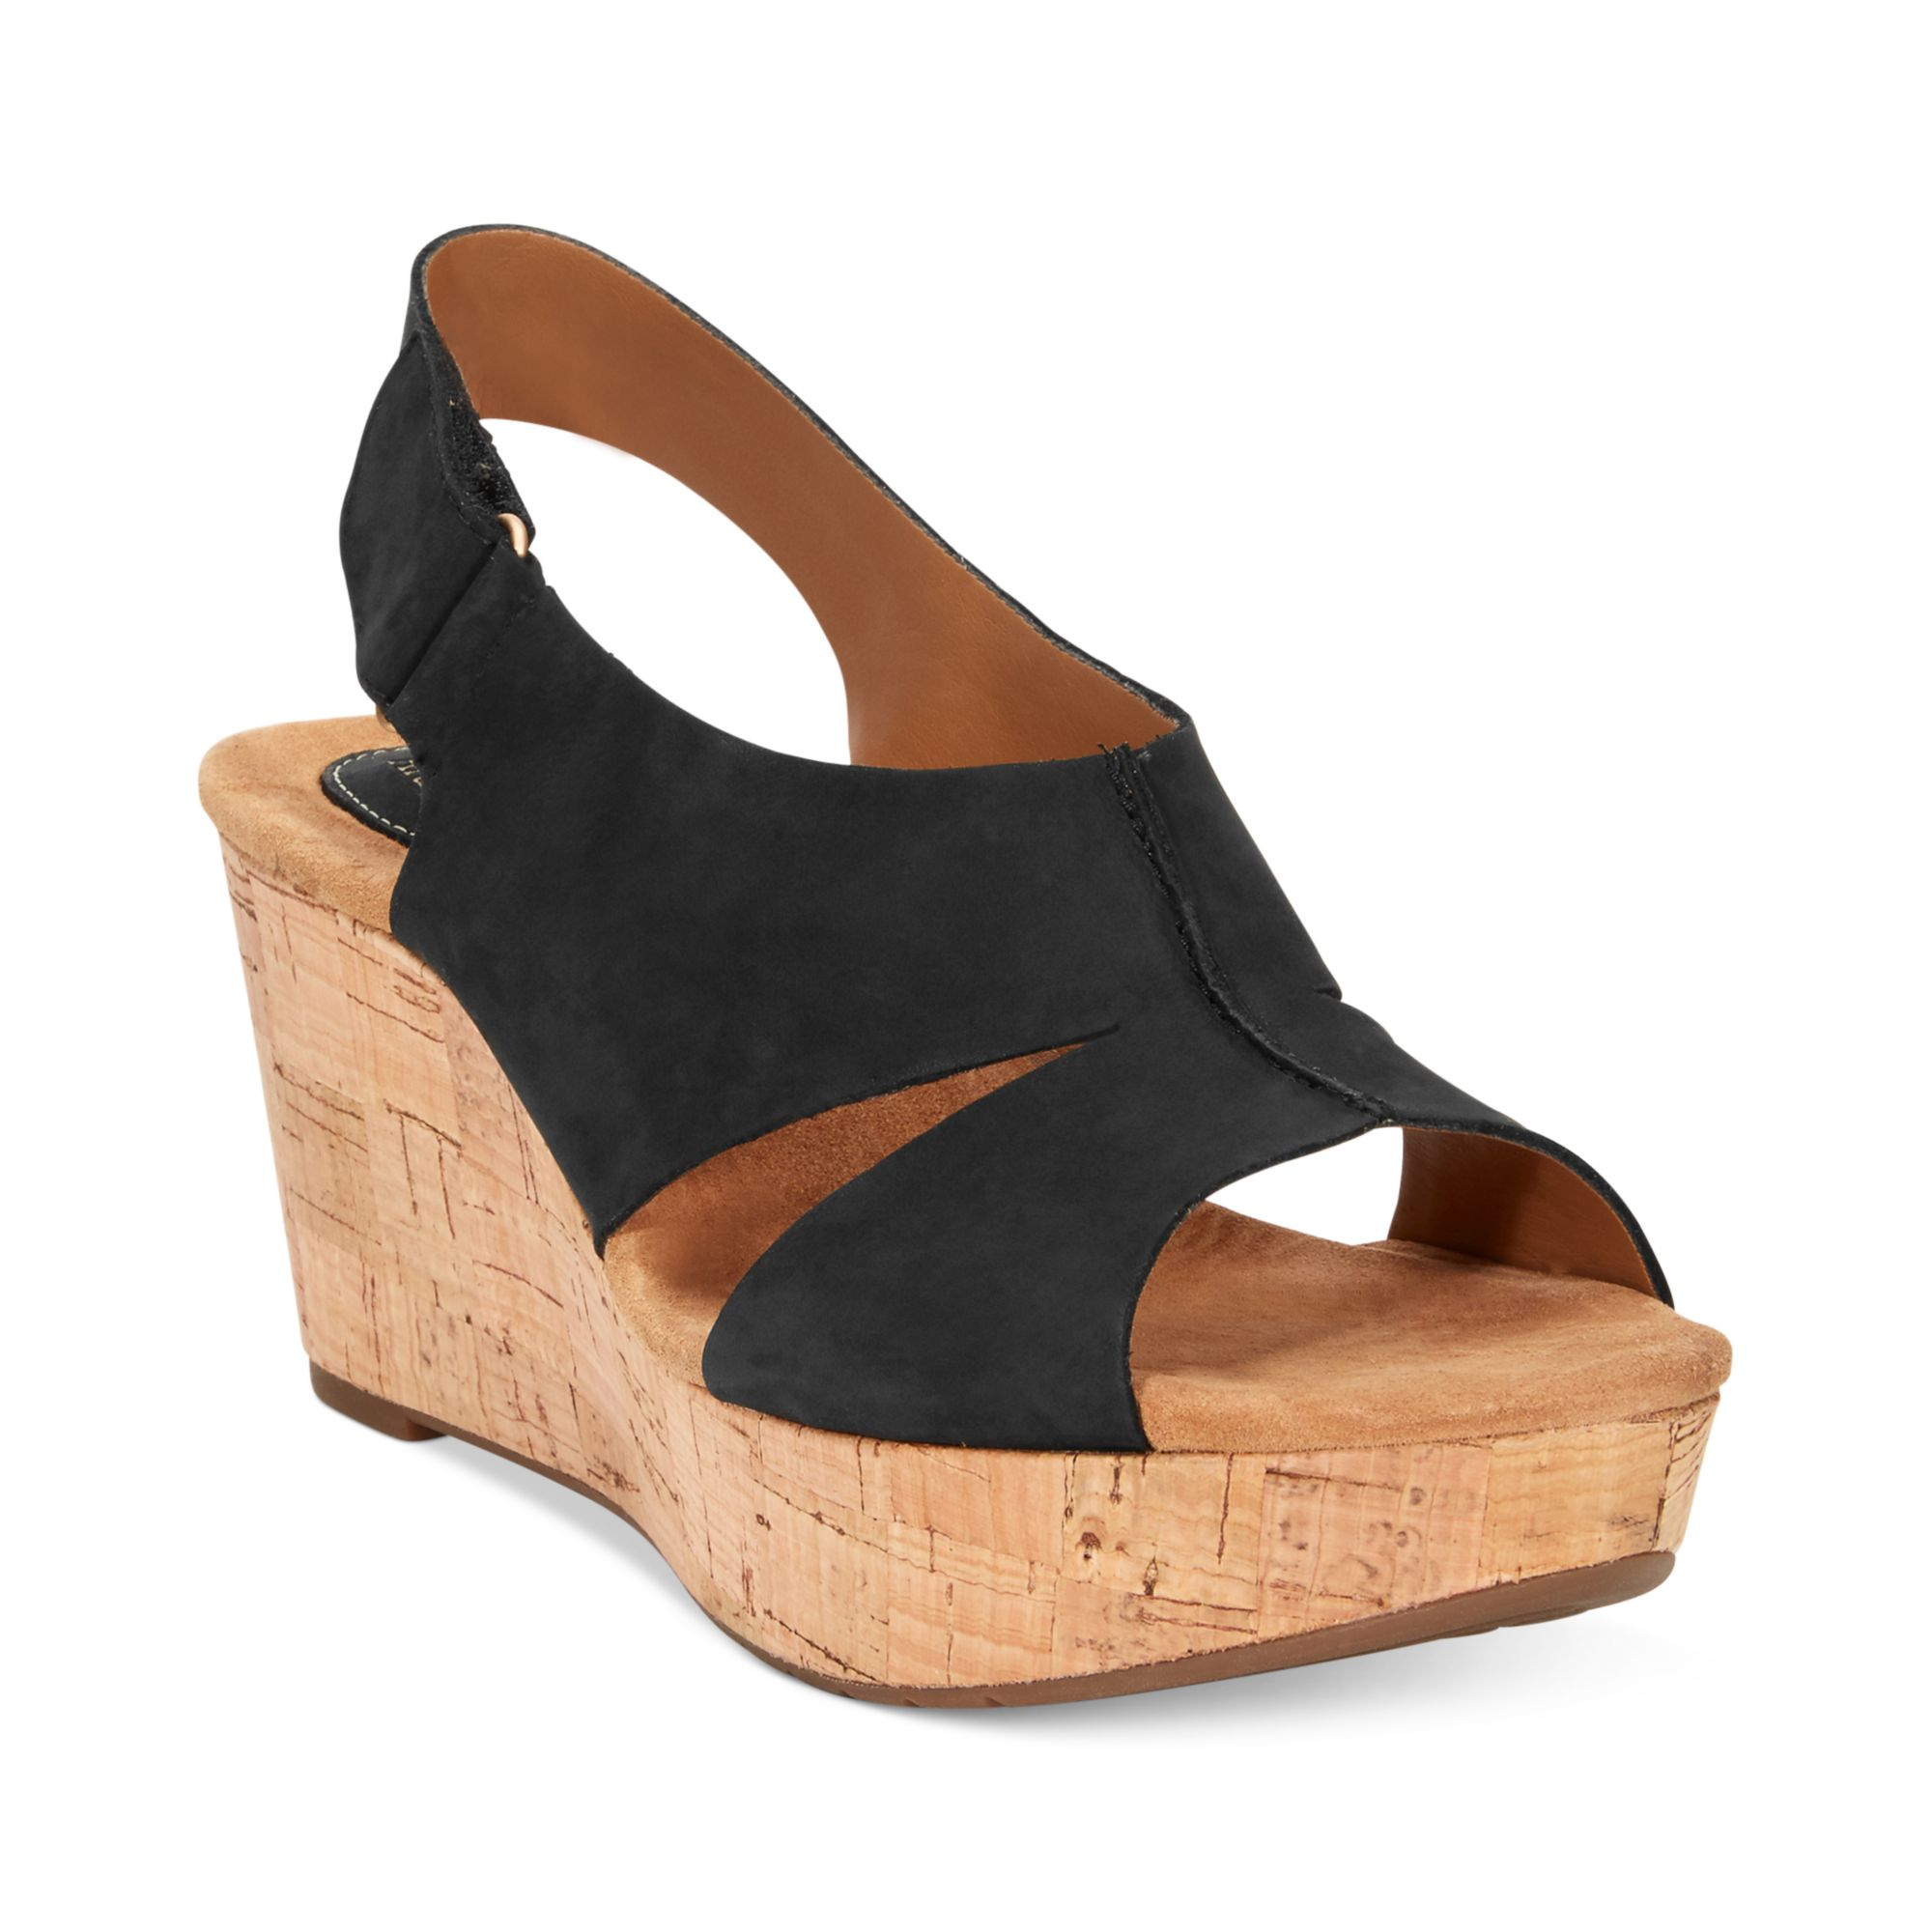 clarks artisan wedge shoes off 63 